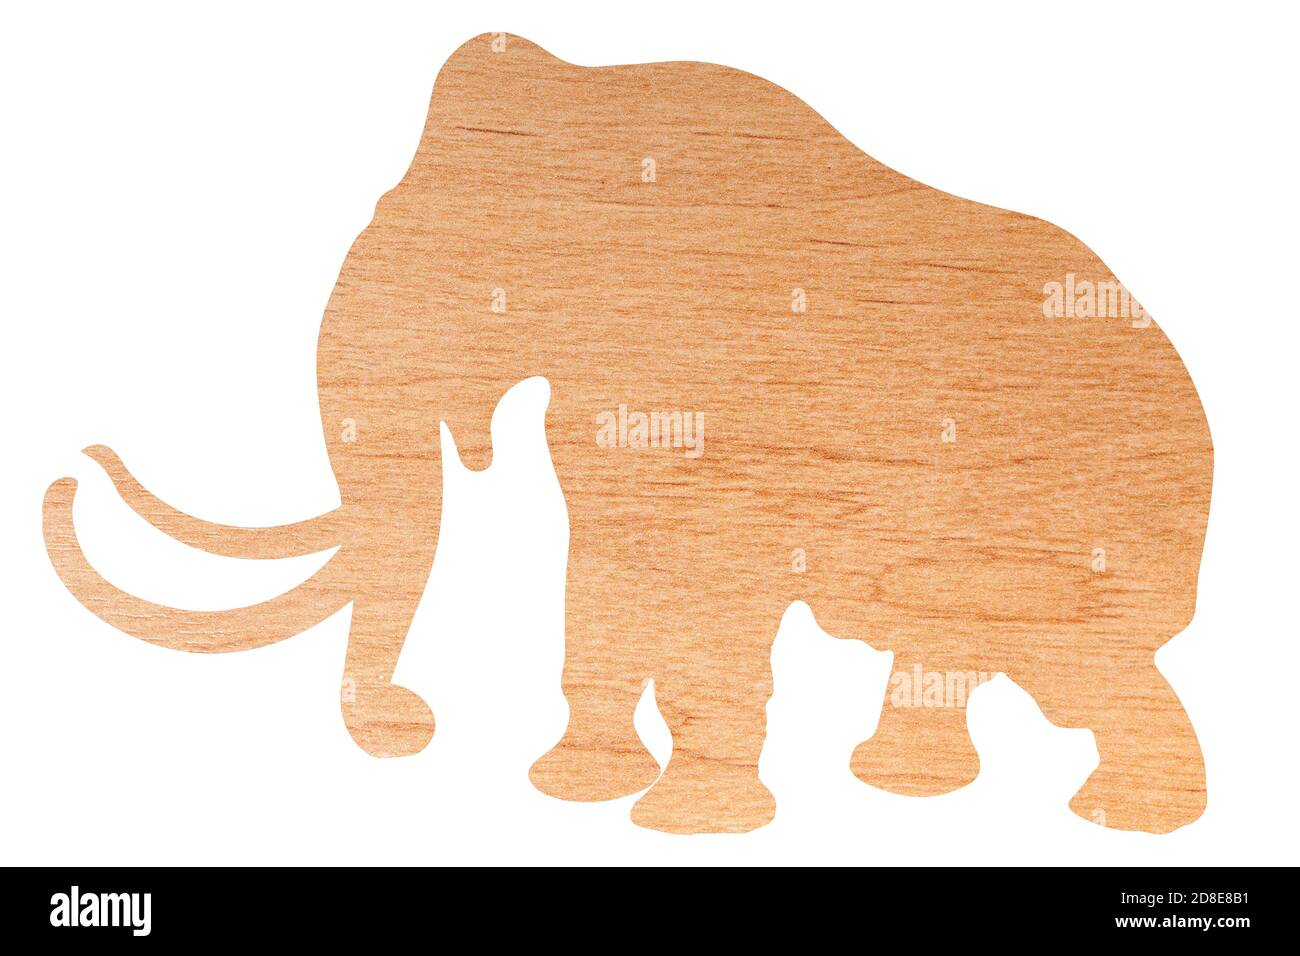 elephant silhouette with wood texture isolated on white background Stock Photo